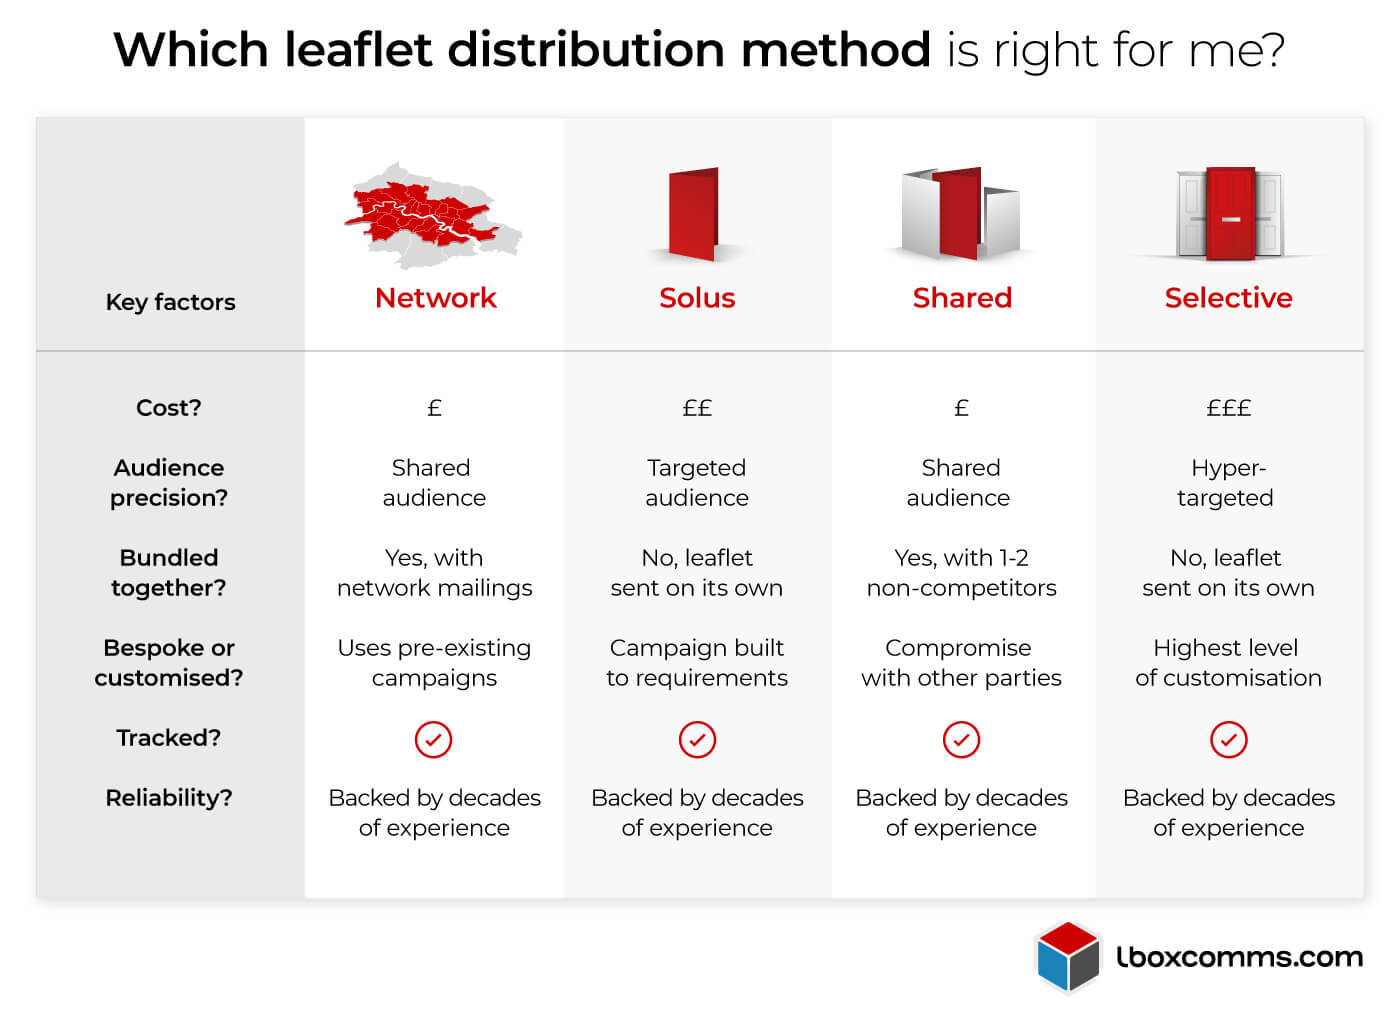 Infographic: Leaflet Distribution Methods - Network, Solus, Shared, Selective - Which is right for you?